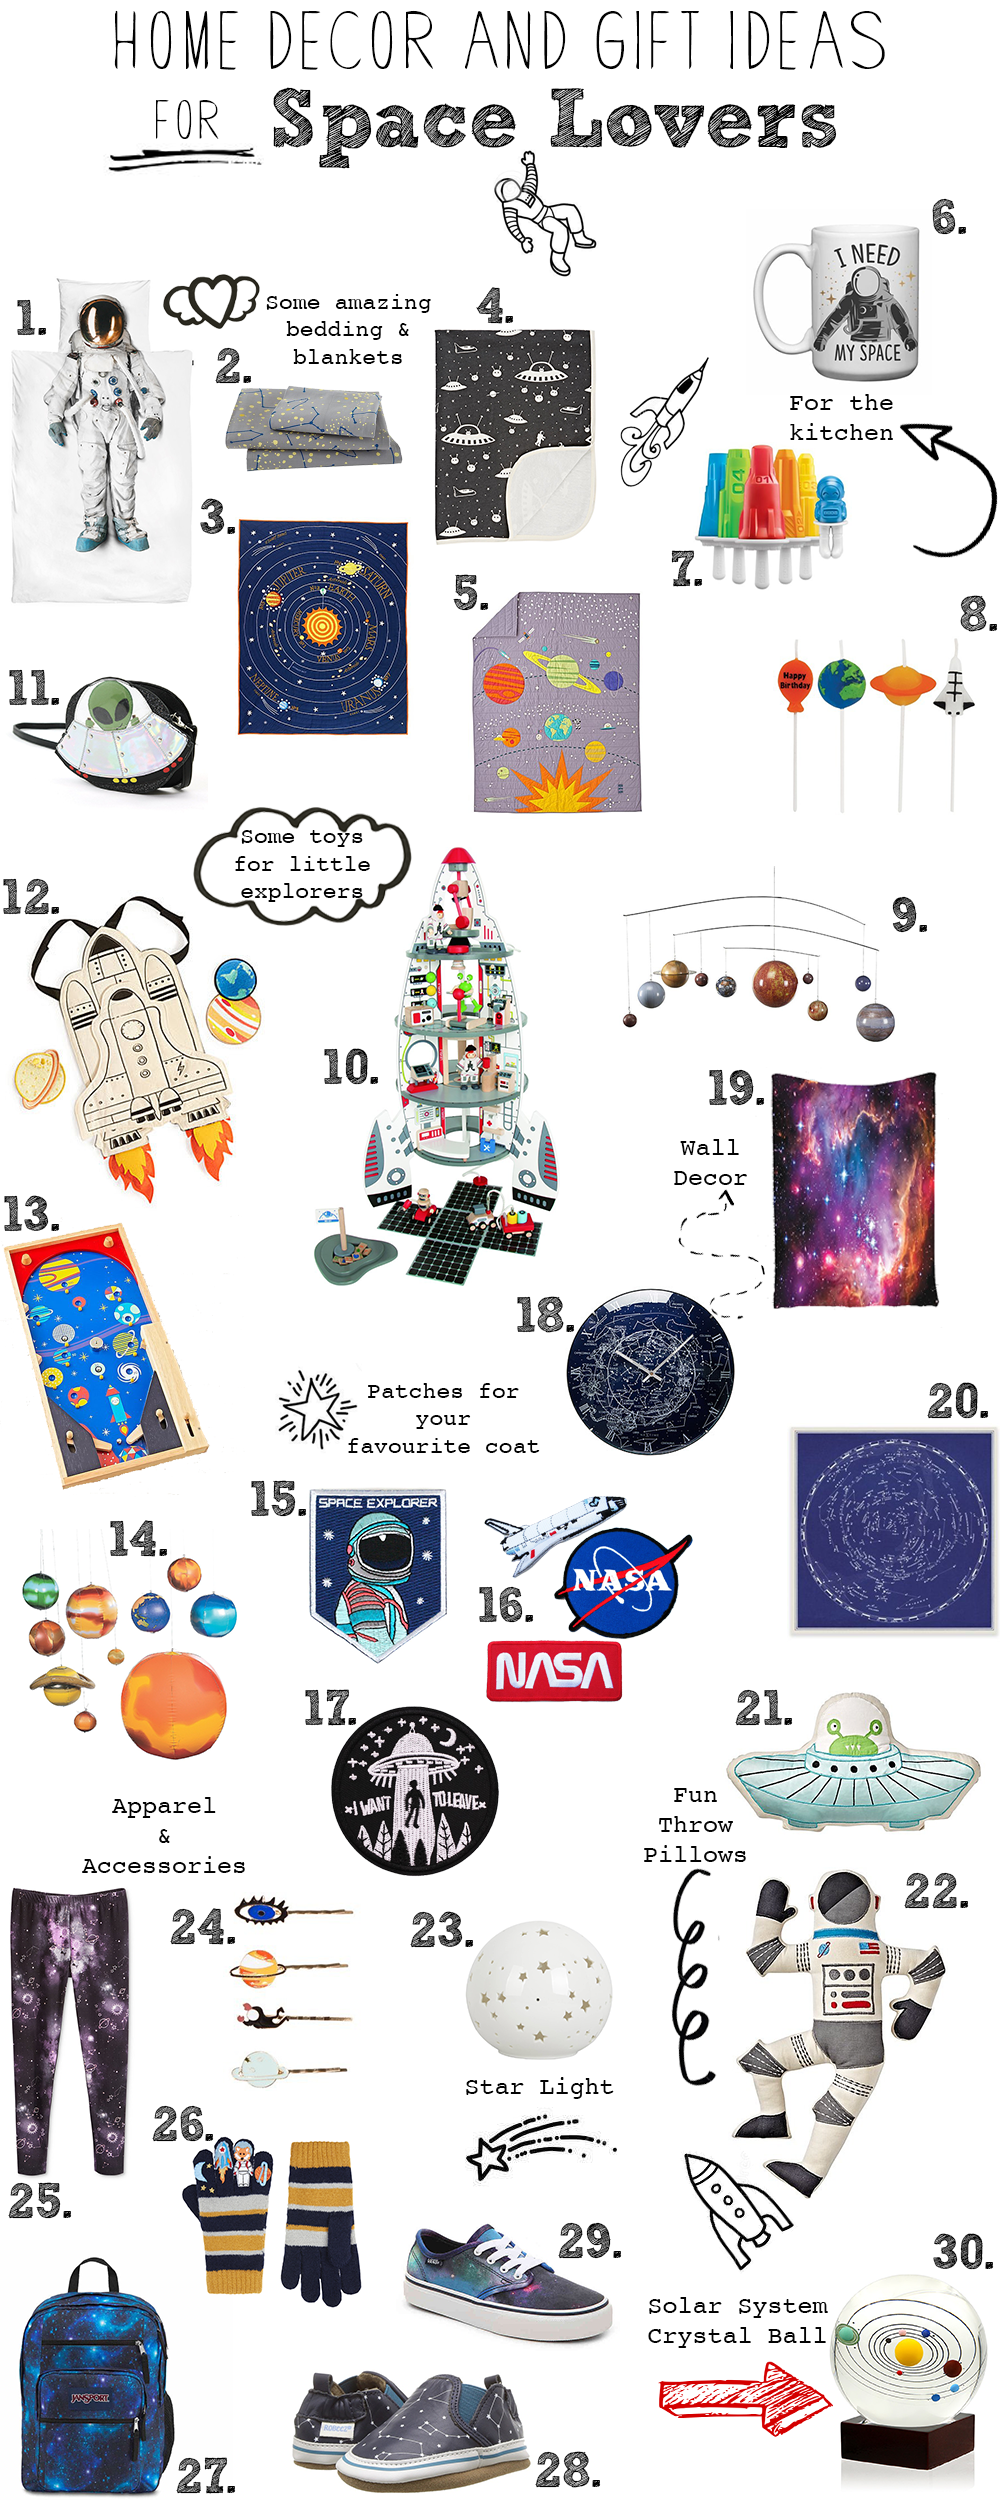 Home decor and gift ideas for space lovers